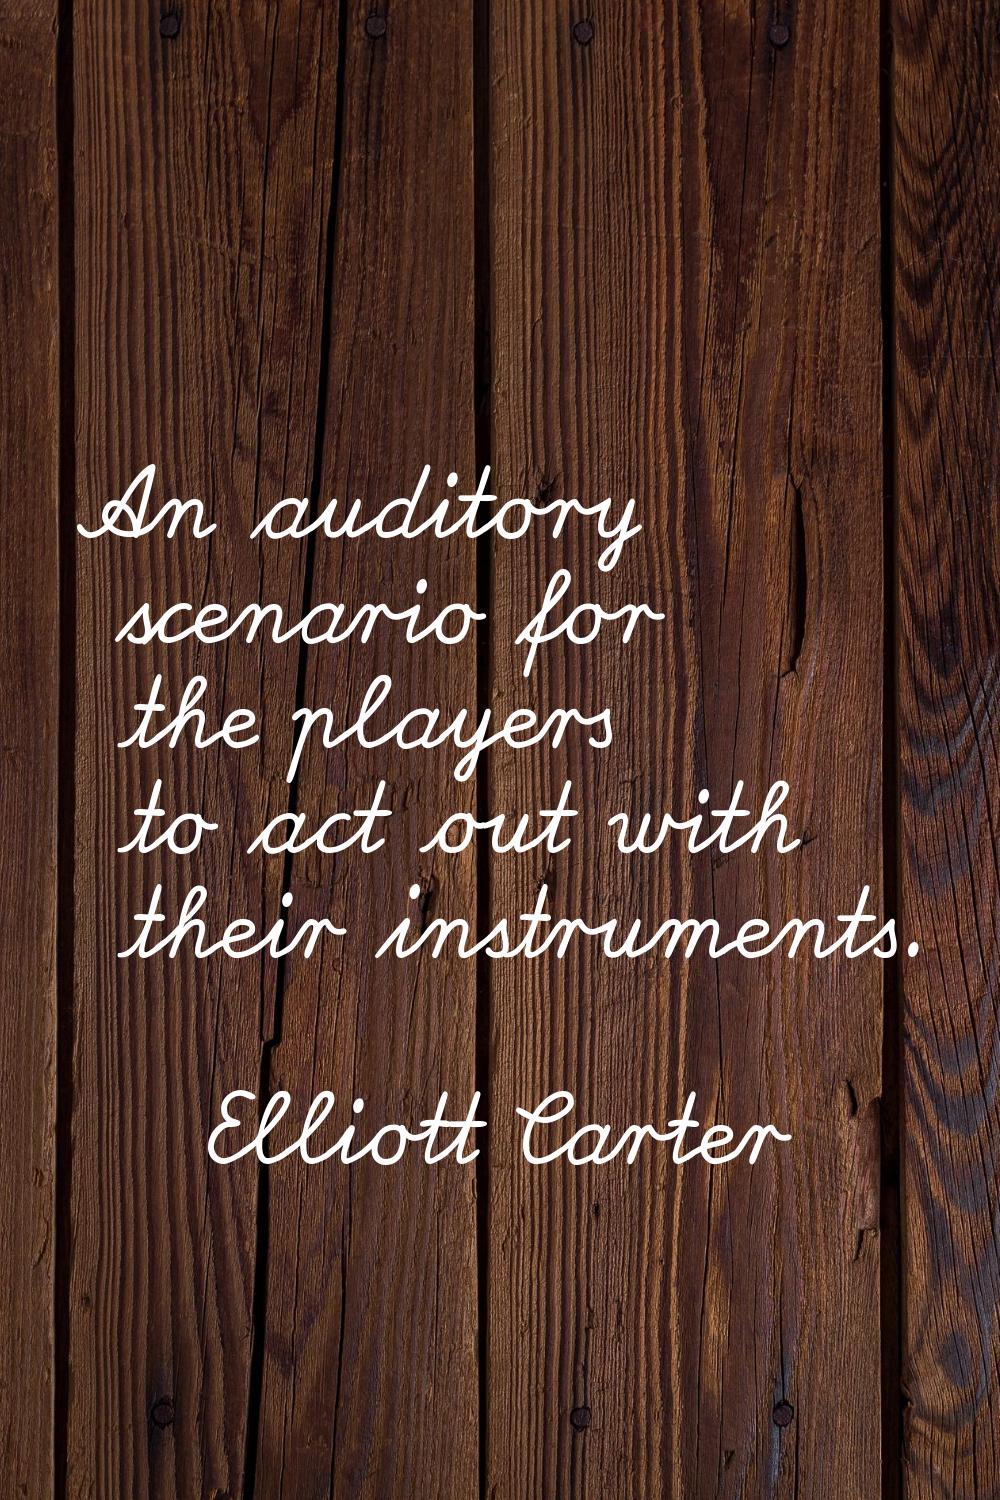 An auditory scenario for the players to act out with their instruments.